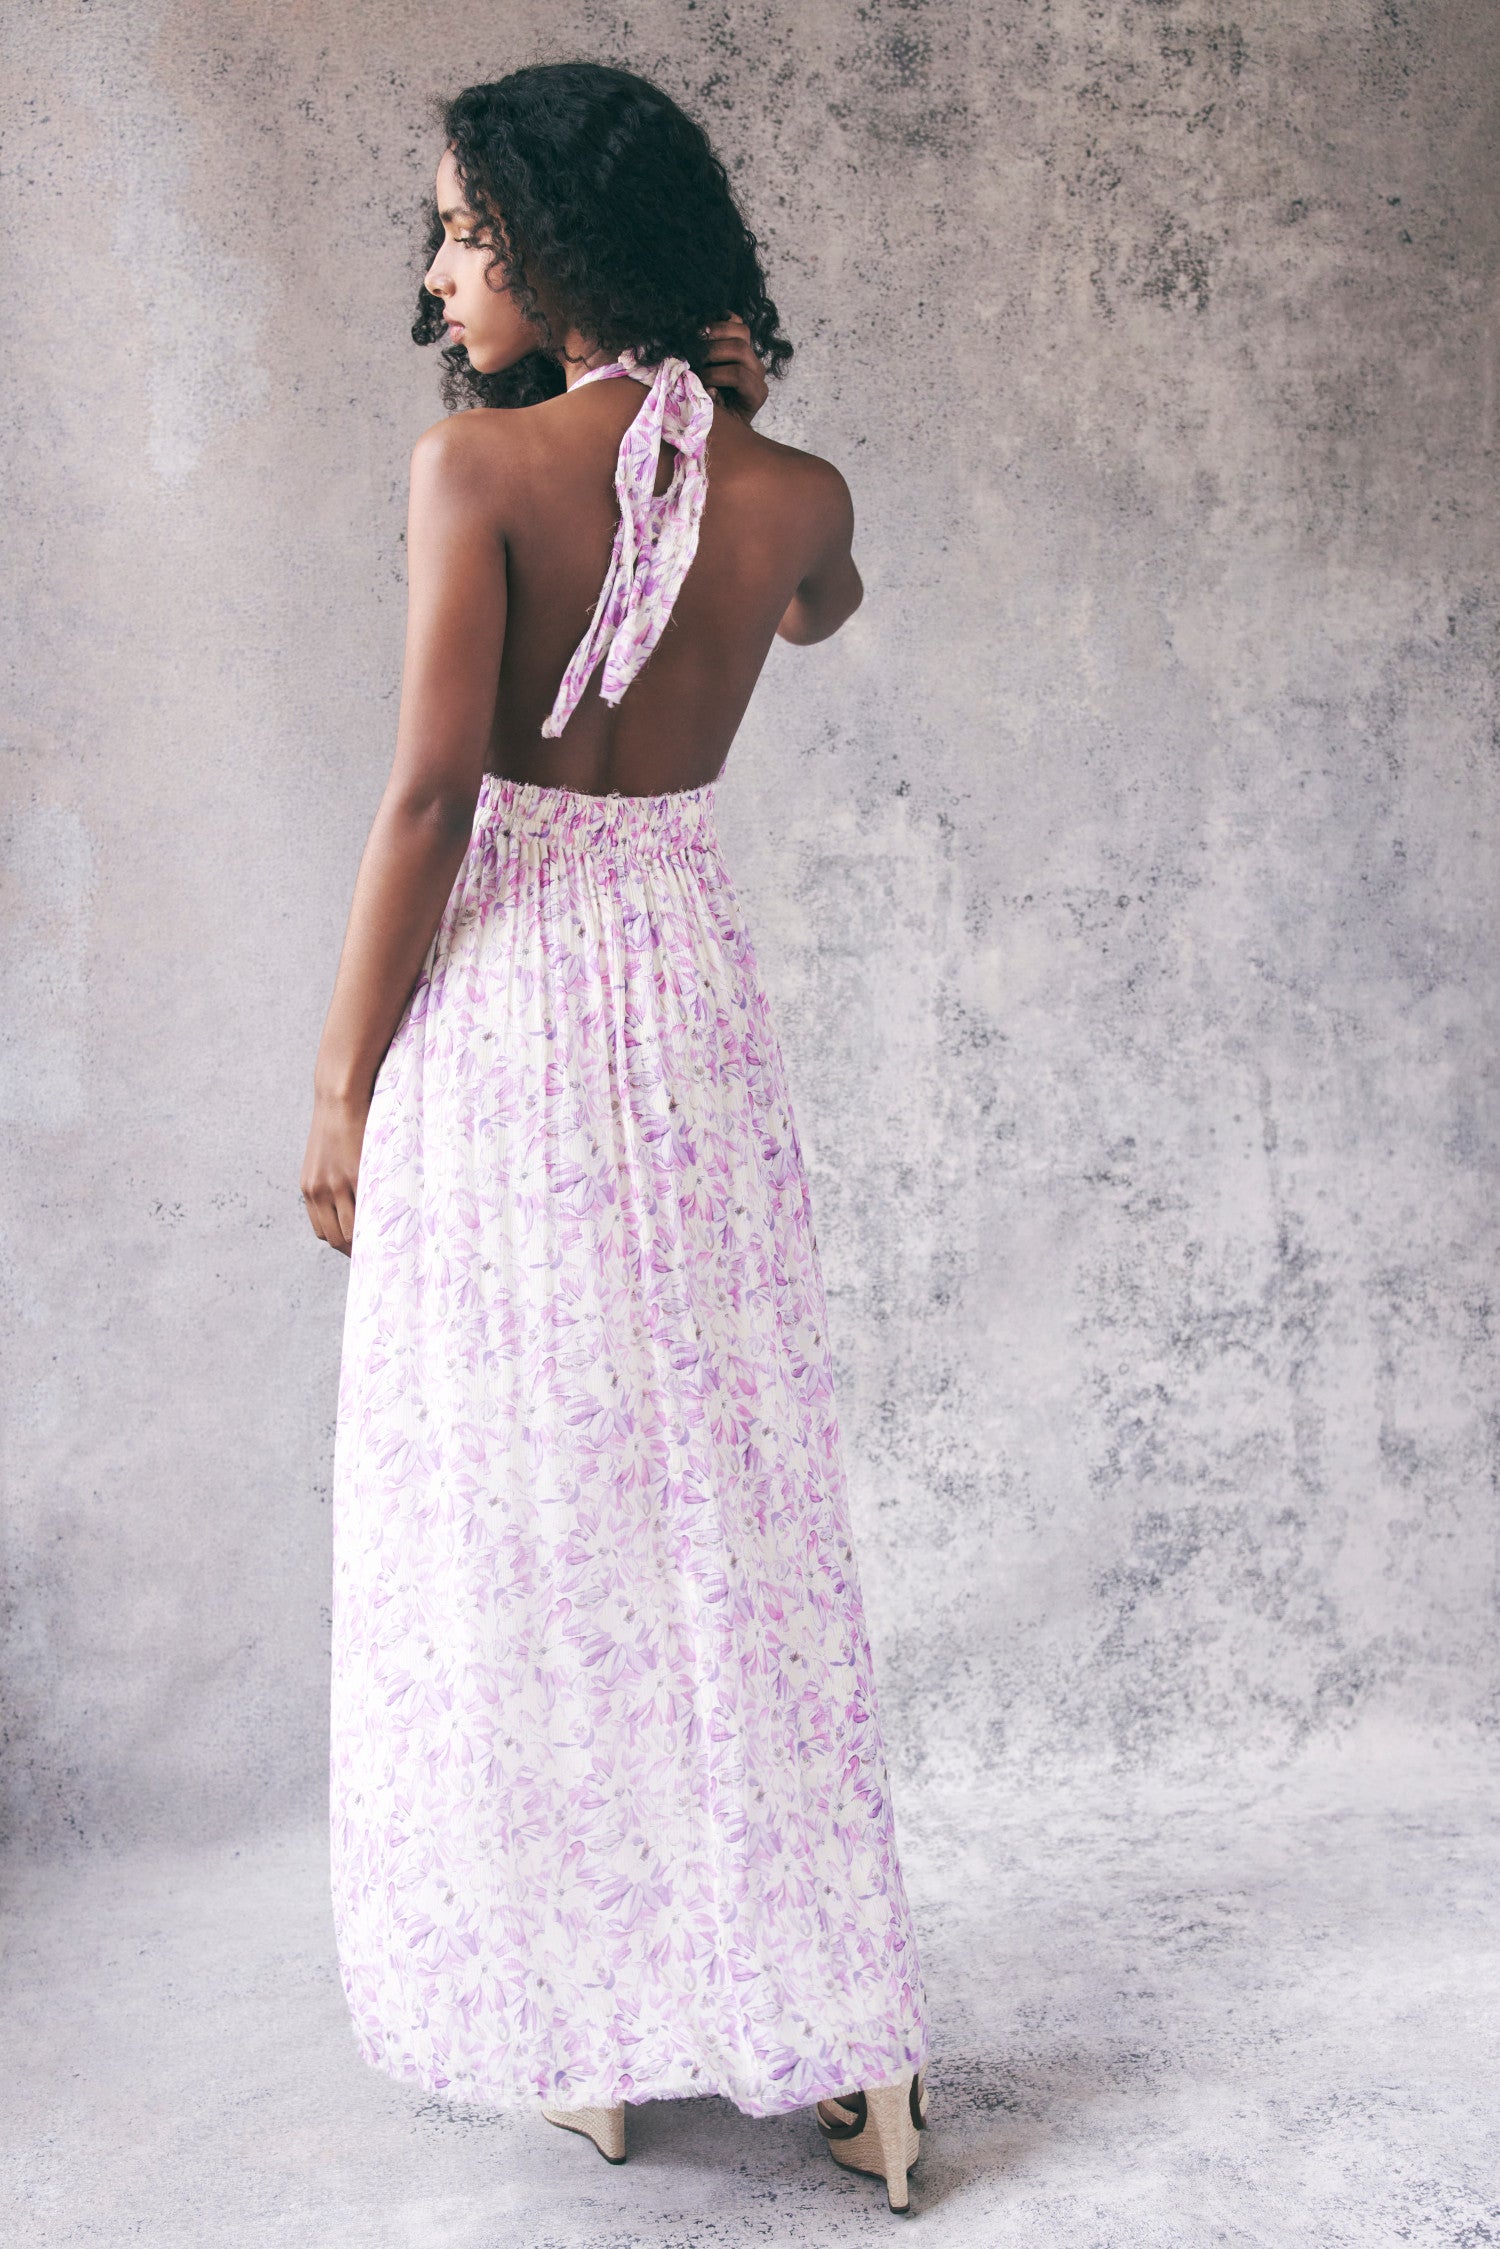 Back image of model wearing white and purple floral halter maxi dress